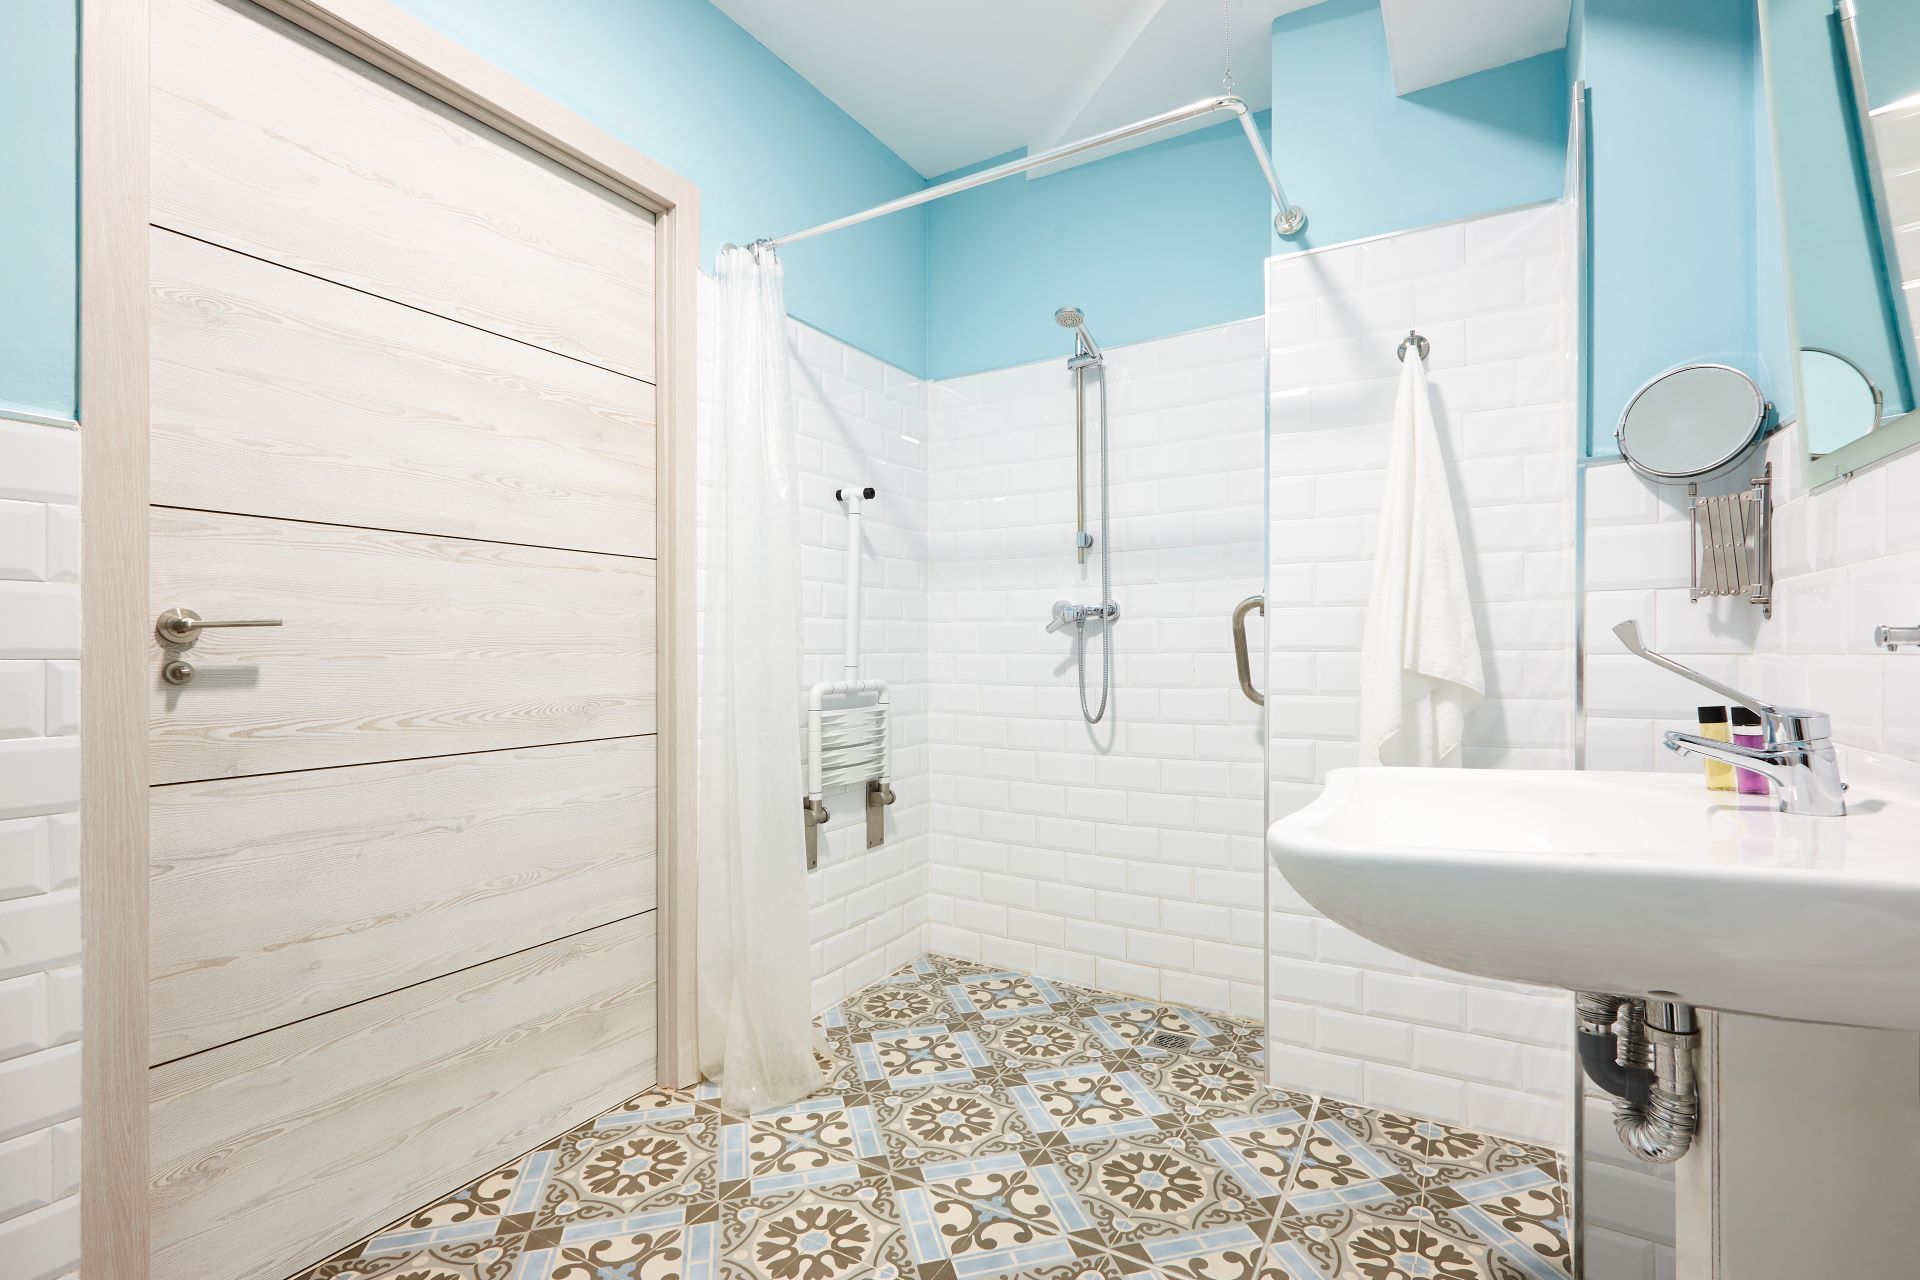 Decorated bathroom adapted for disabled people. Aging in place bathroom design